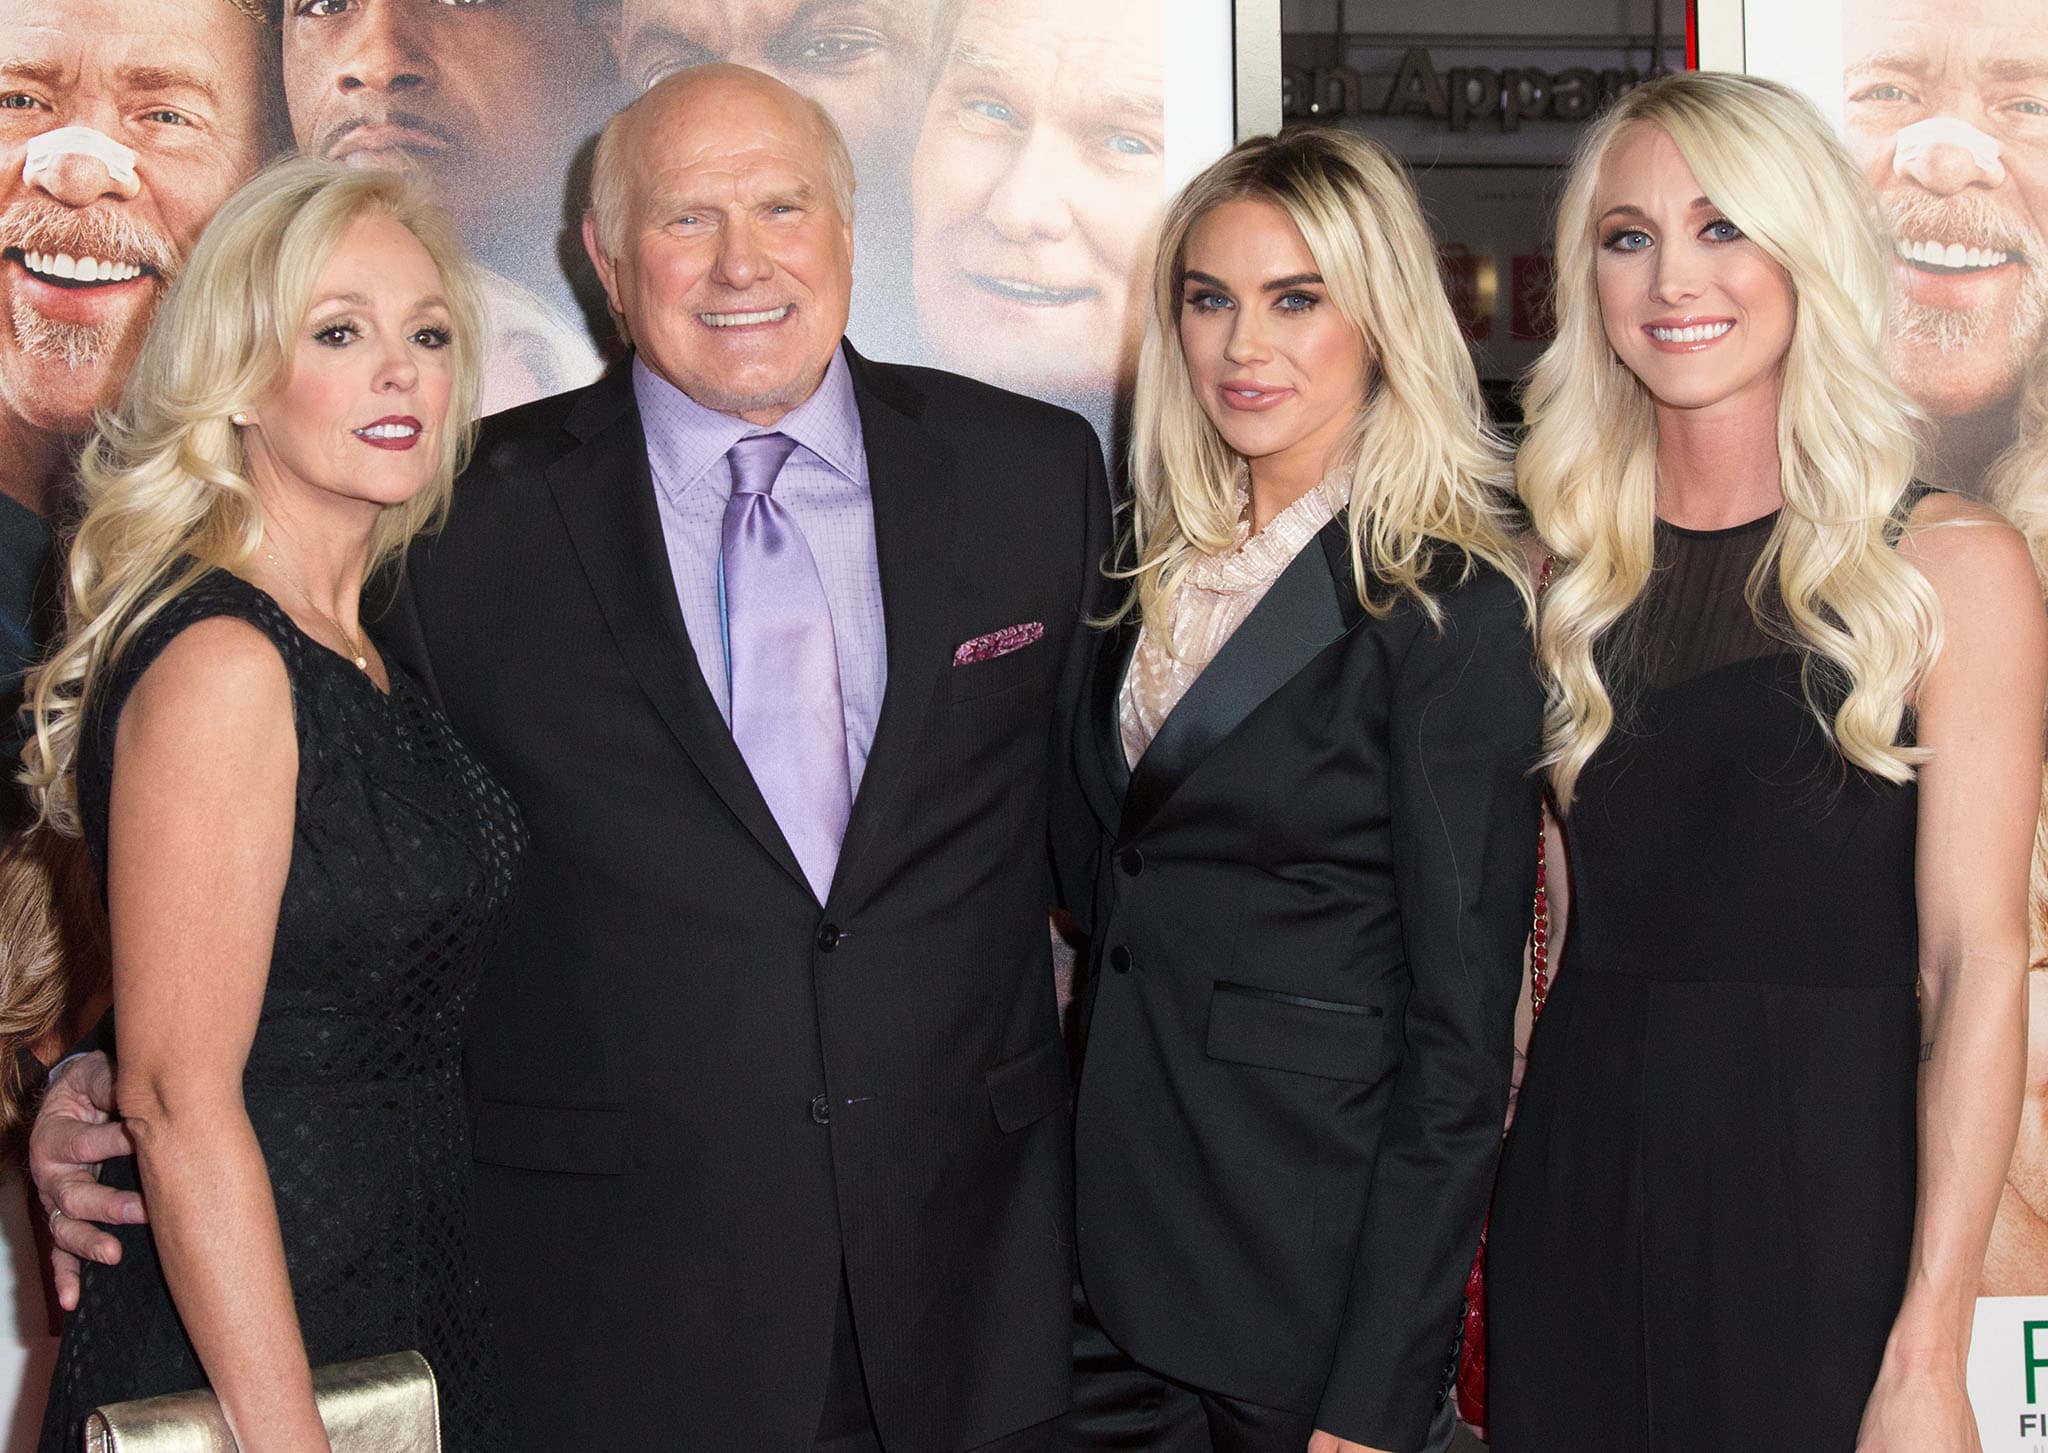 Tammy Bradshaw and Terry Bradshaw with his daughters Rachel and Erin